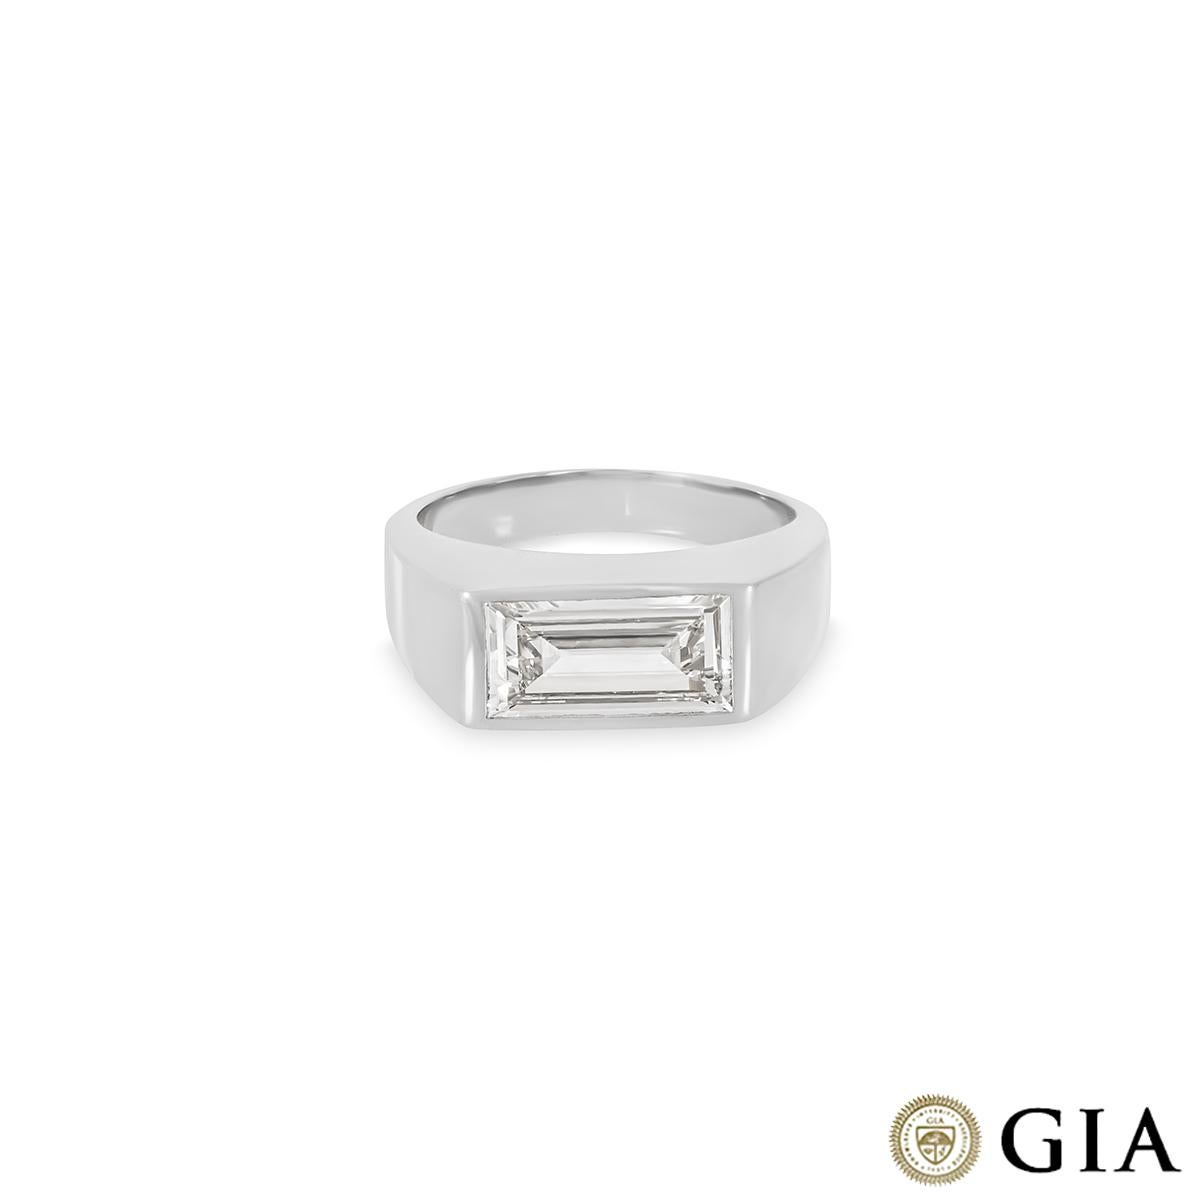 GIA Certified Platinum Baguette Cut Diamond Ring 1.98ct J/SI2 In Excellent Condition For Sale In London, GB